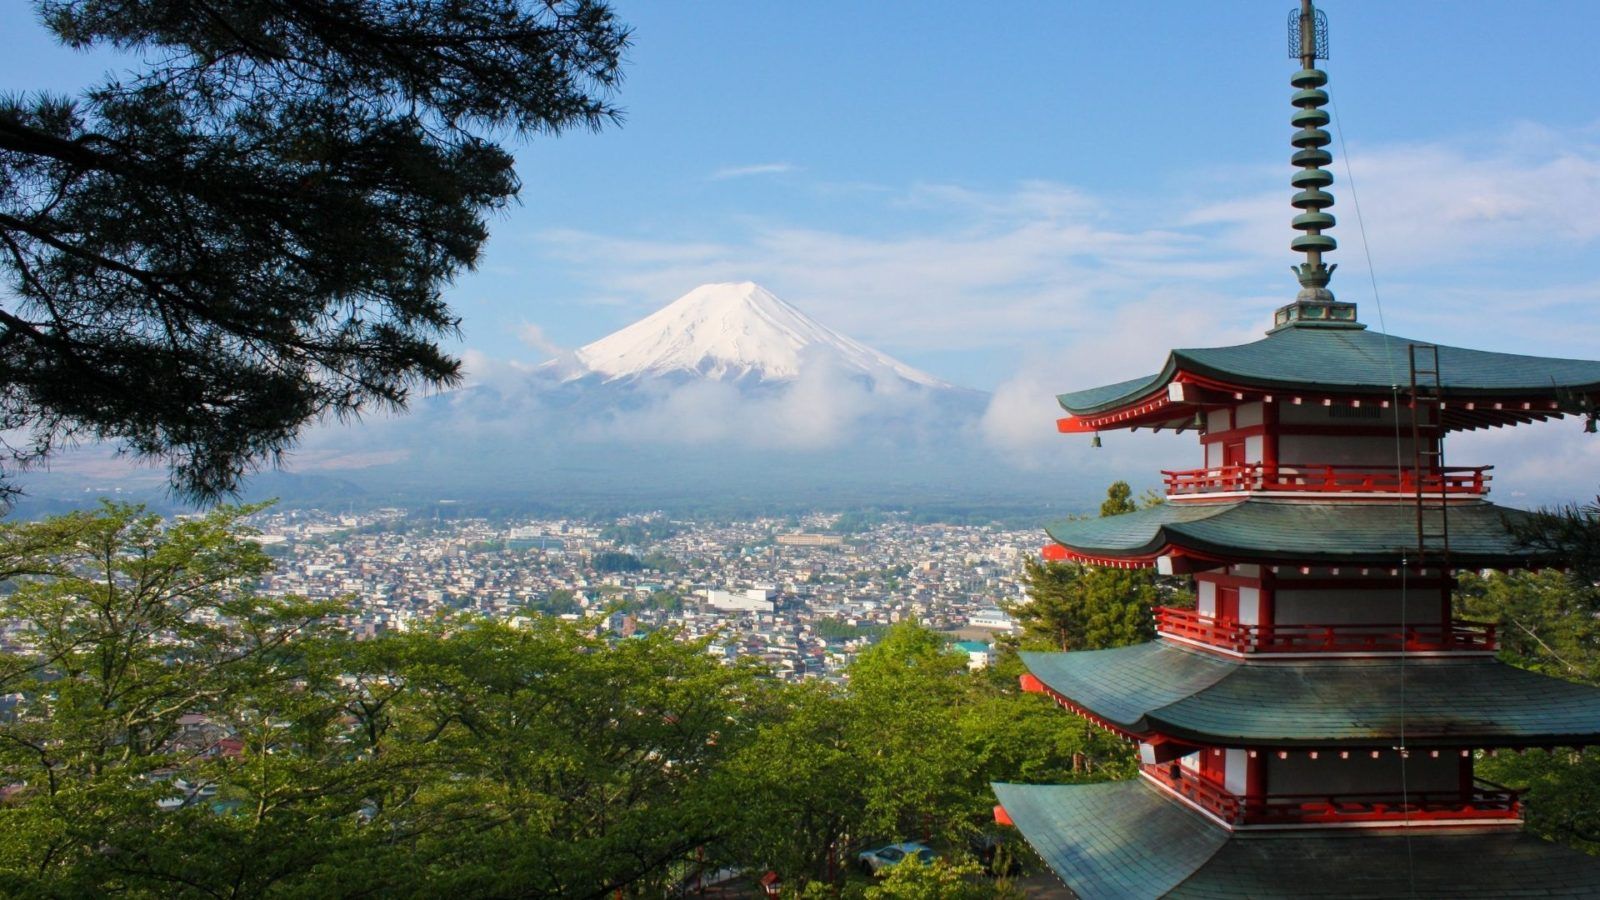 Japan COVID-19: Tourists to Visit on Guided Tours, Have to Wear Masks, Get Medical Insurance